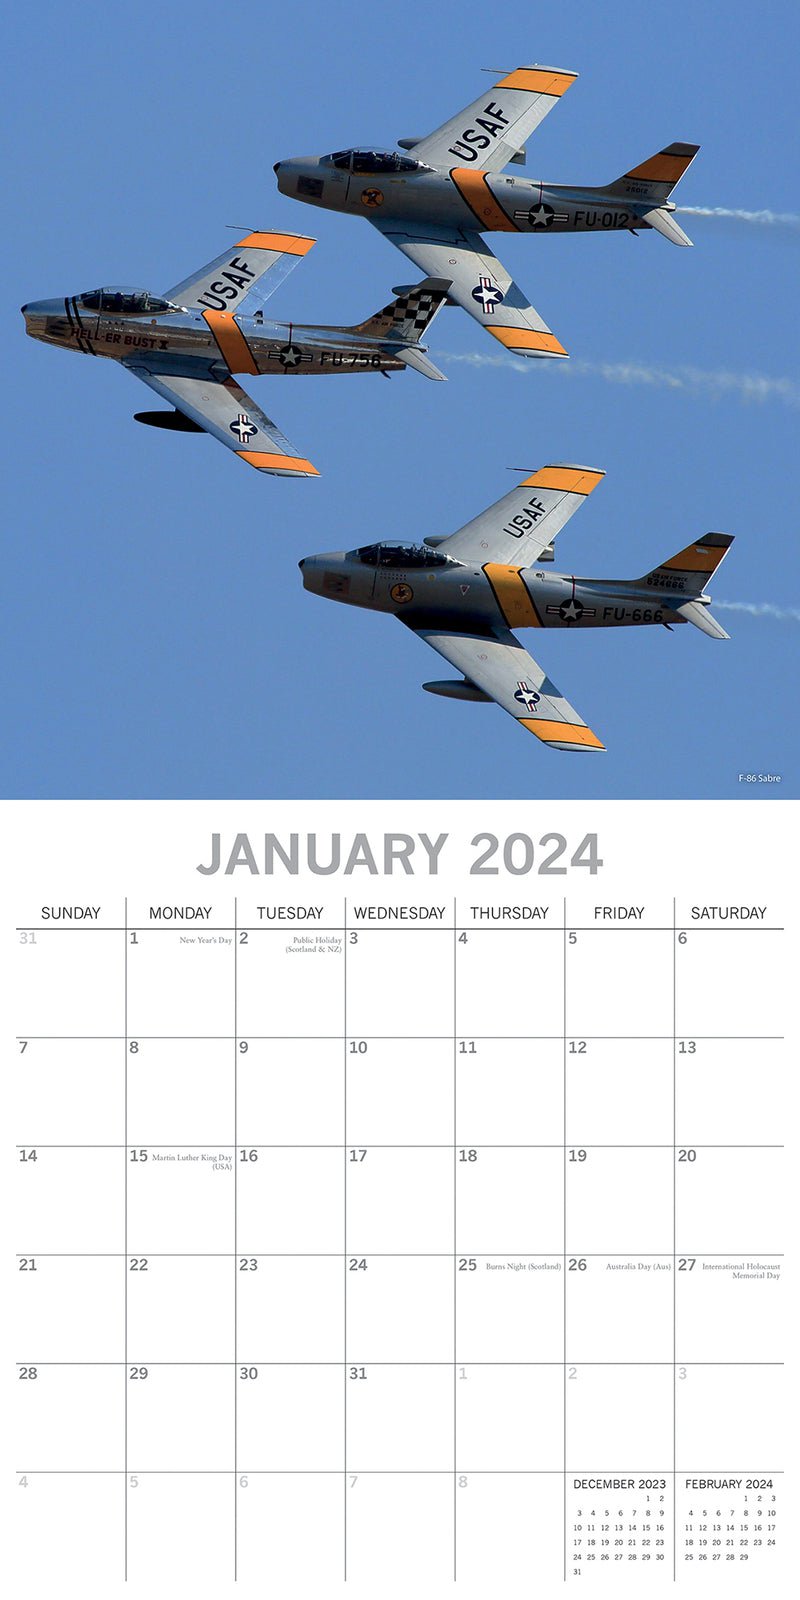 Warbirds - 2024 Square Wall Calendar 16 Month Premium Planner Xmas New Year Gift